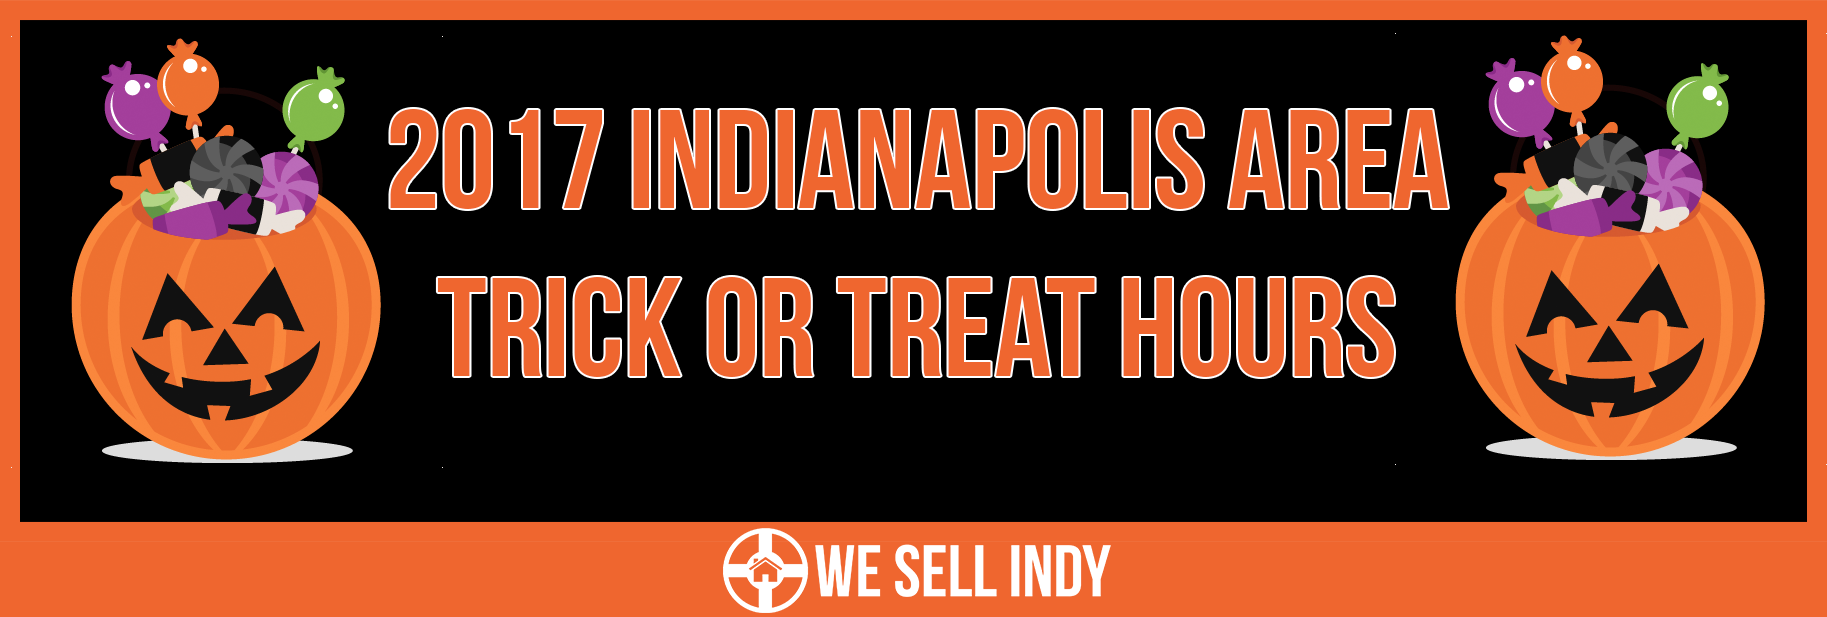 Indianapolis Trick or Treat Hours We Sell Indy TeamKim Carpenter